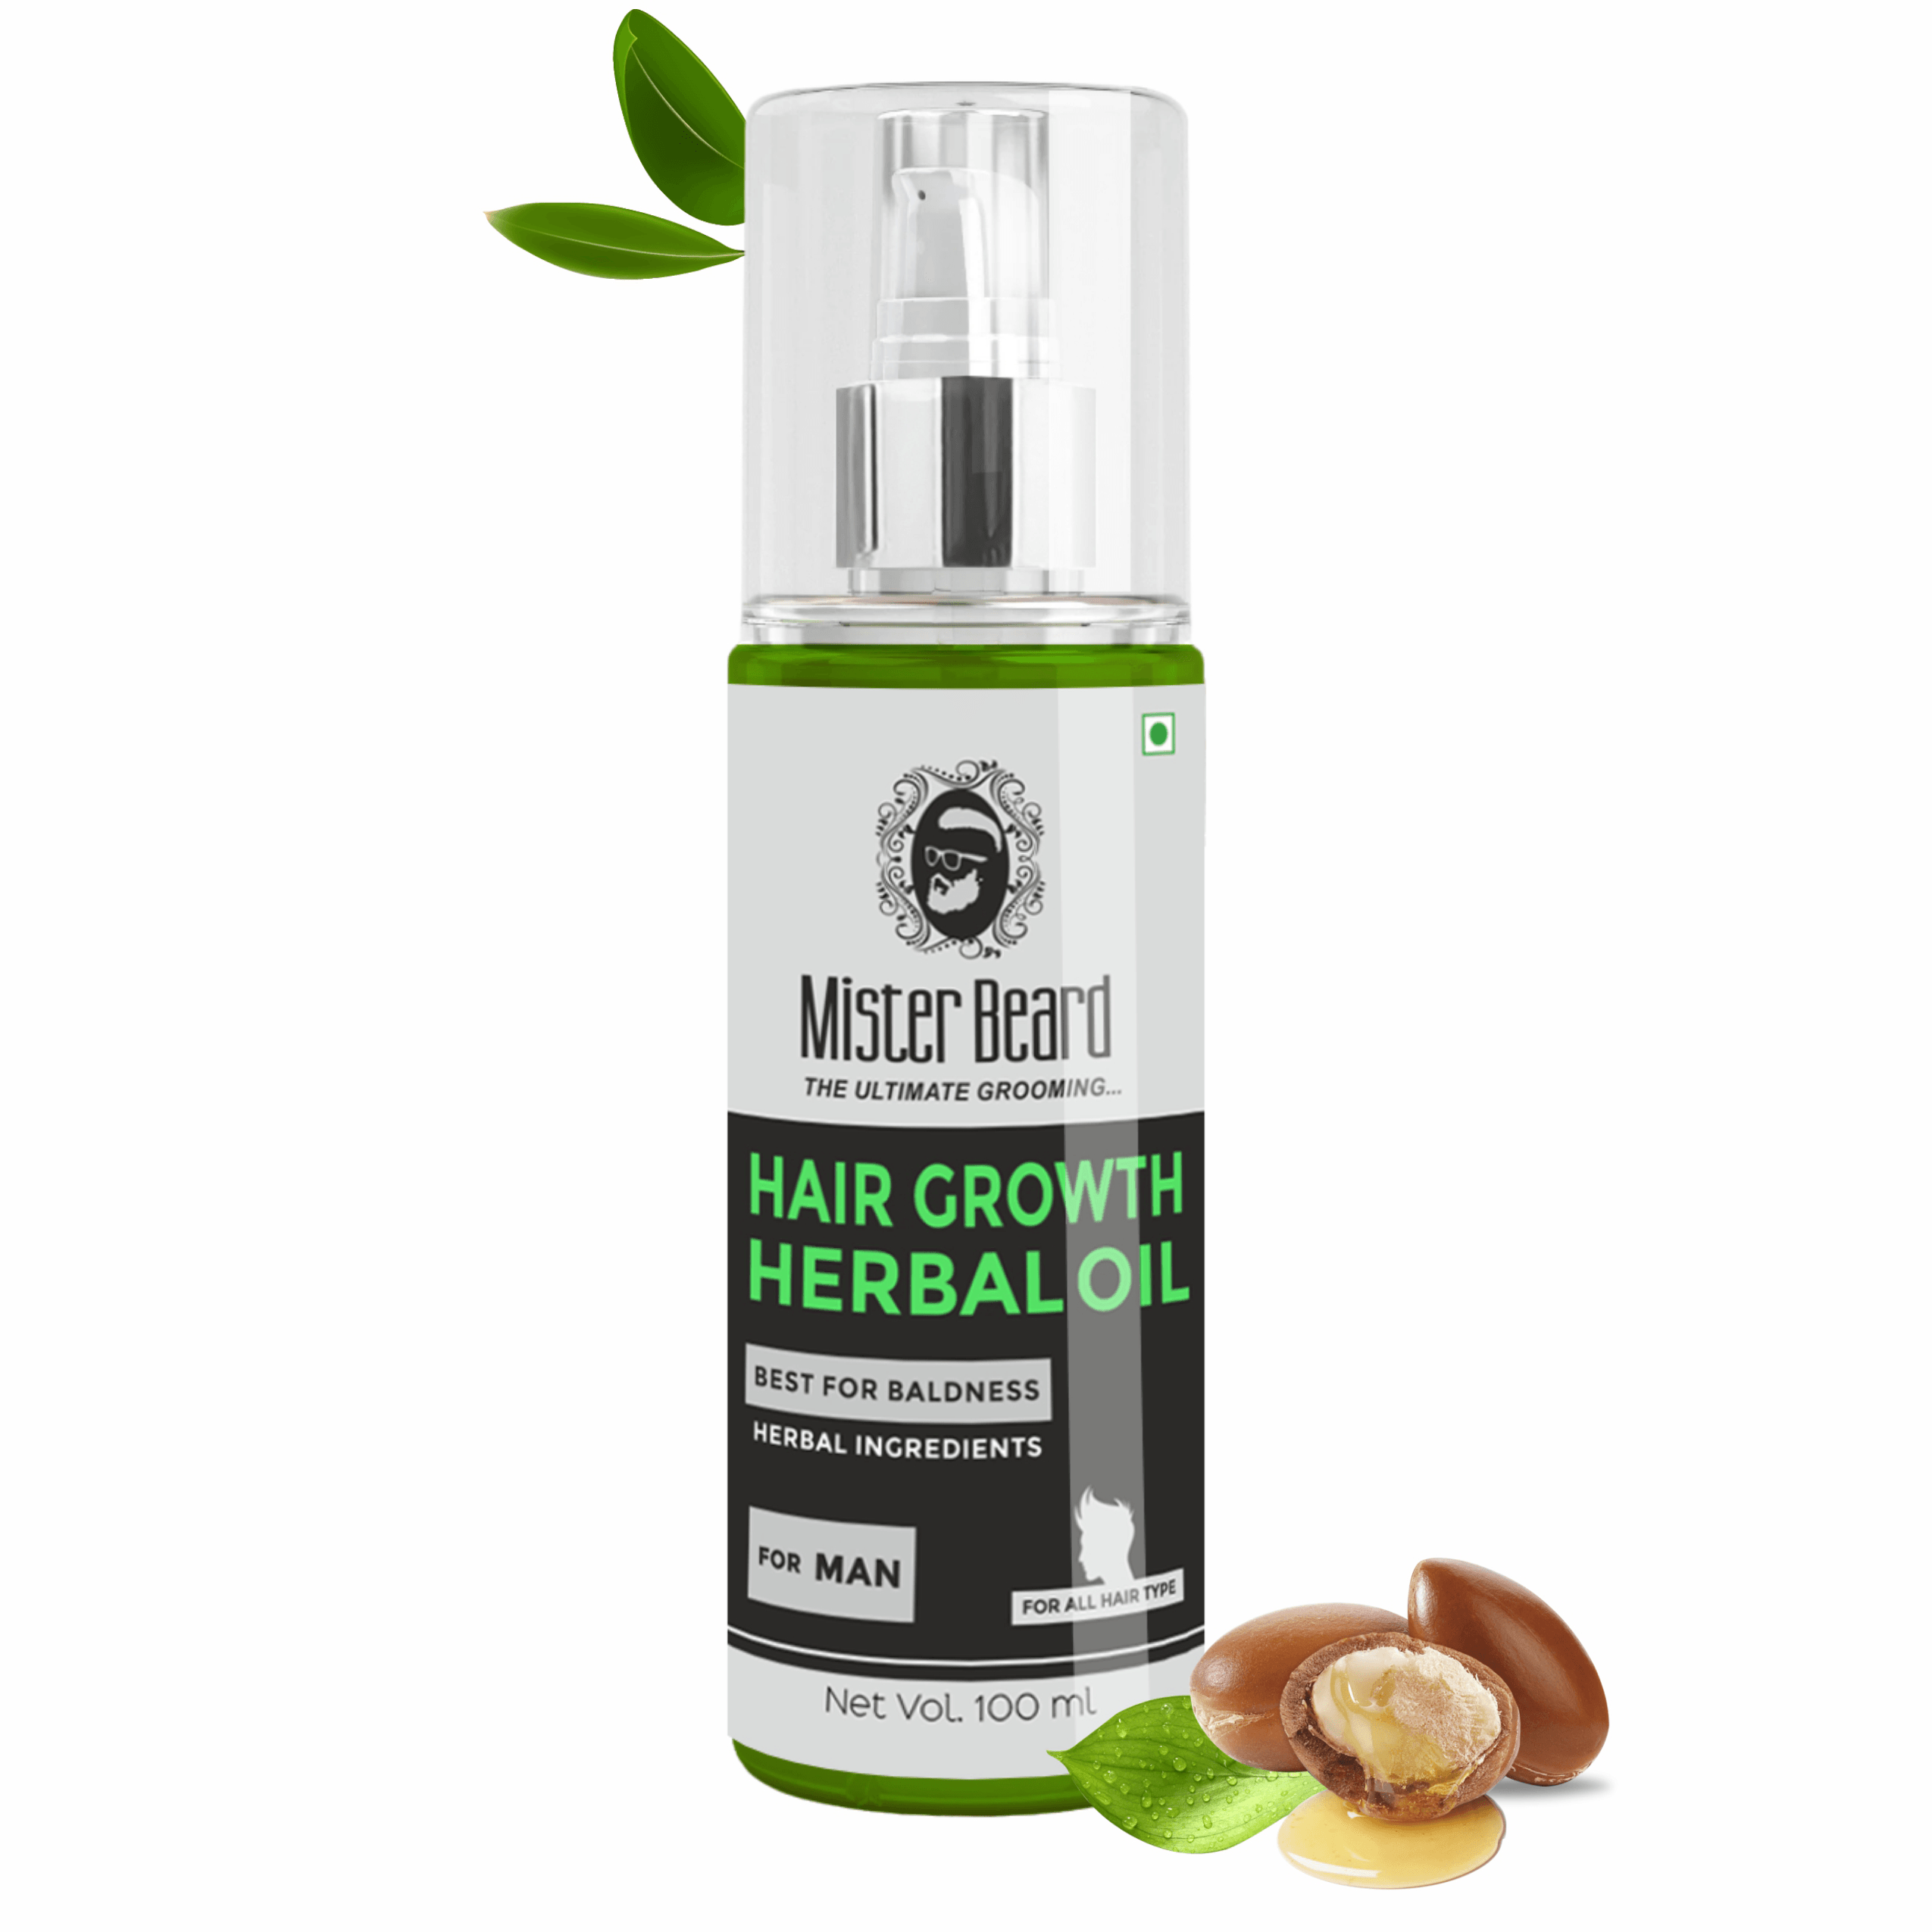 Mister Beard Hair Growth Herbal Oil|Boosts Follicles|Hair Oil With Growth Action | Guaranteed Hair Growth by Using for 3 months | Stimulates the Roots & Prevents Baldness,100ml - Pink Root